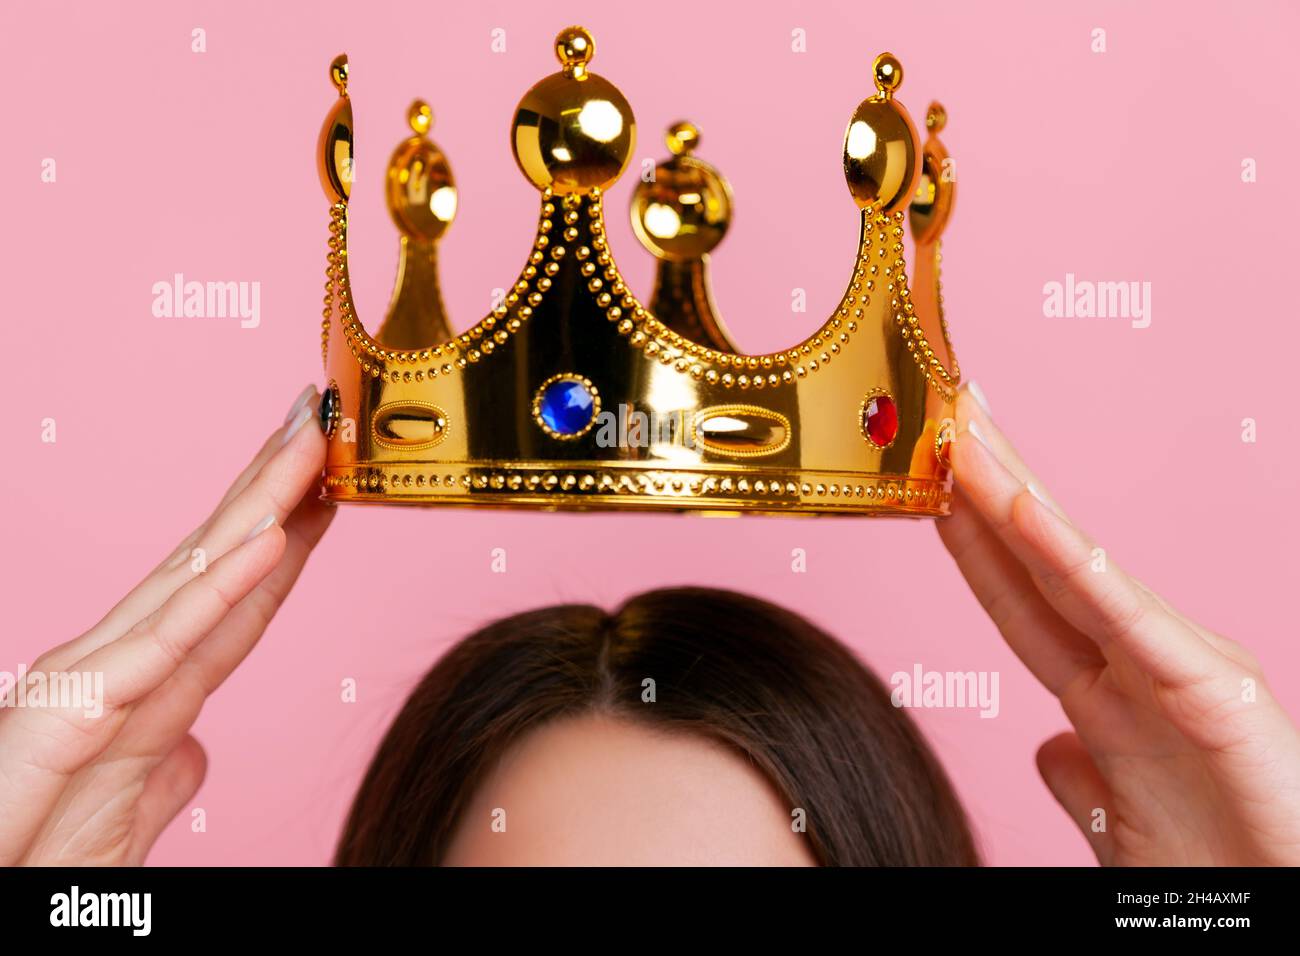 Unknown woman putting on golden crown, arrogance and privileged status, concept of self confidence in success, self-motivation and dreams to be best. Indoor studio shot isolated on pink background. Stock Photo